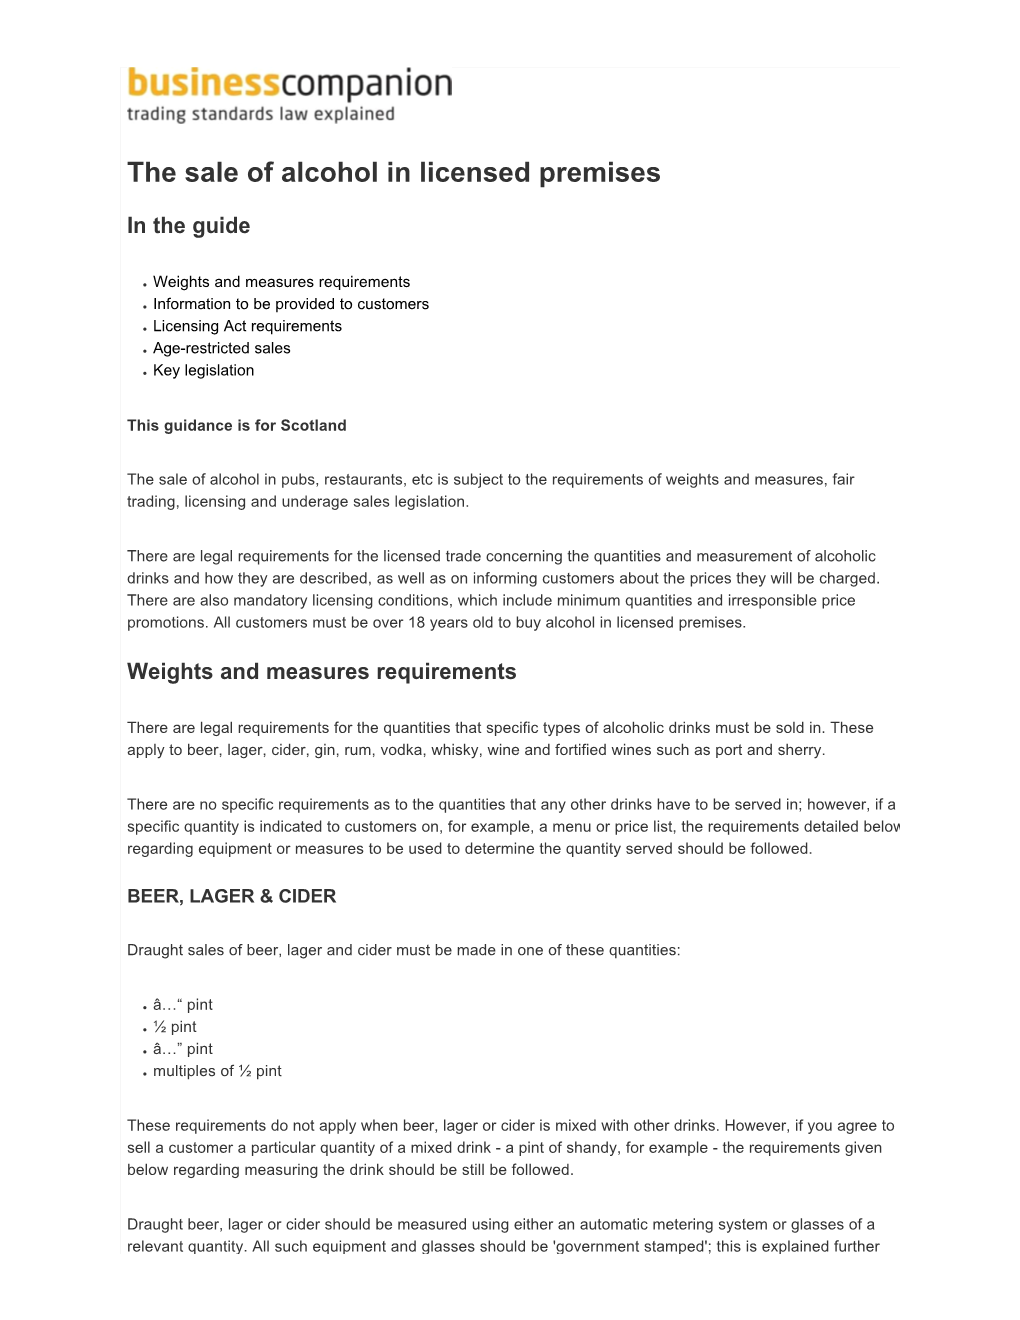 The Sale of Alcohol in Licensed Premises